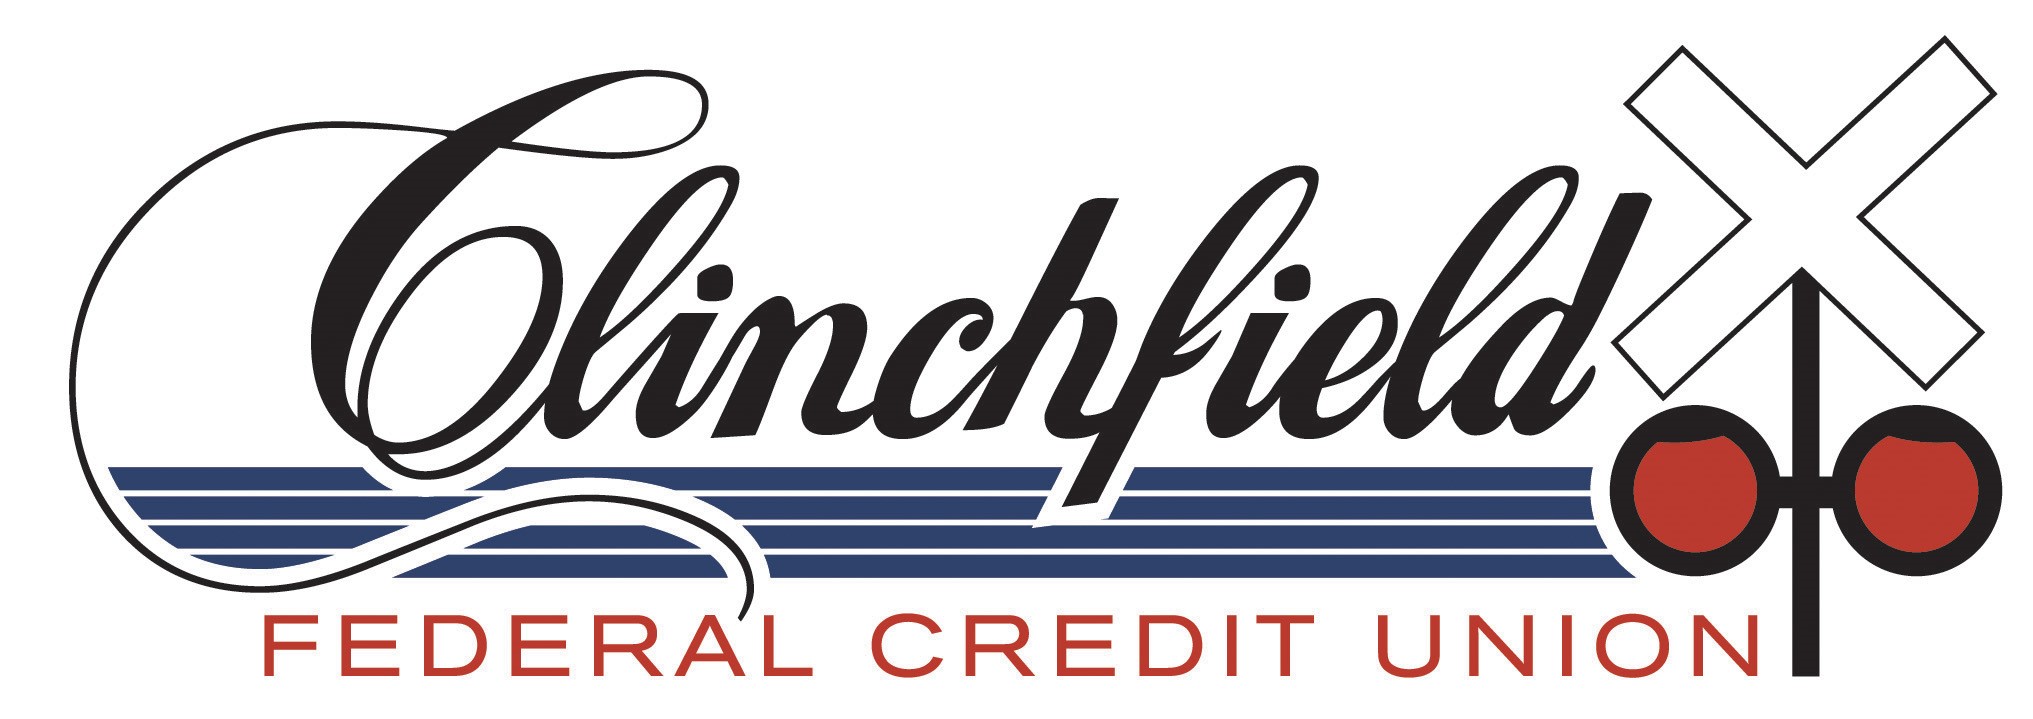 Clinchfield Federal Credit Union - Unicoi County Chamber of Commerce